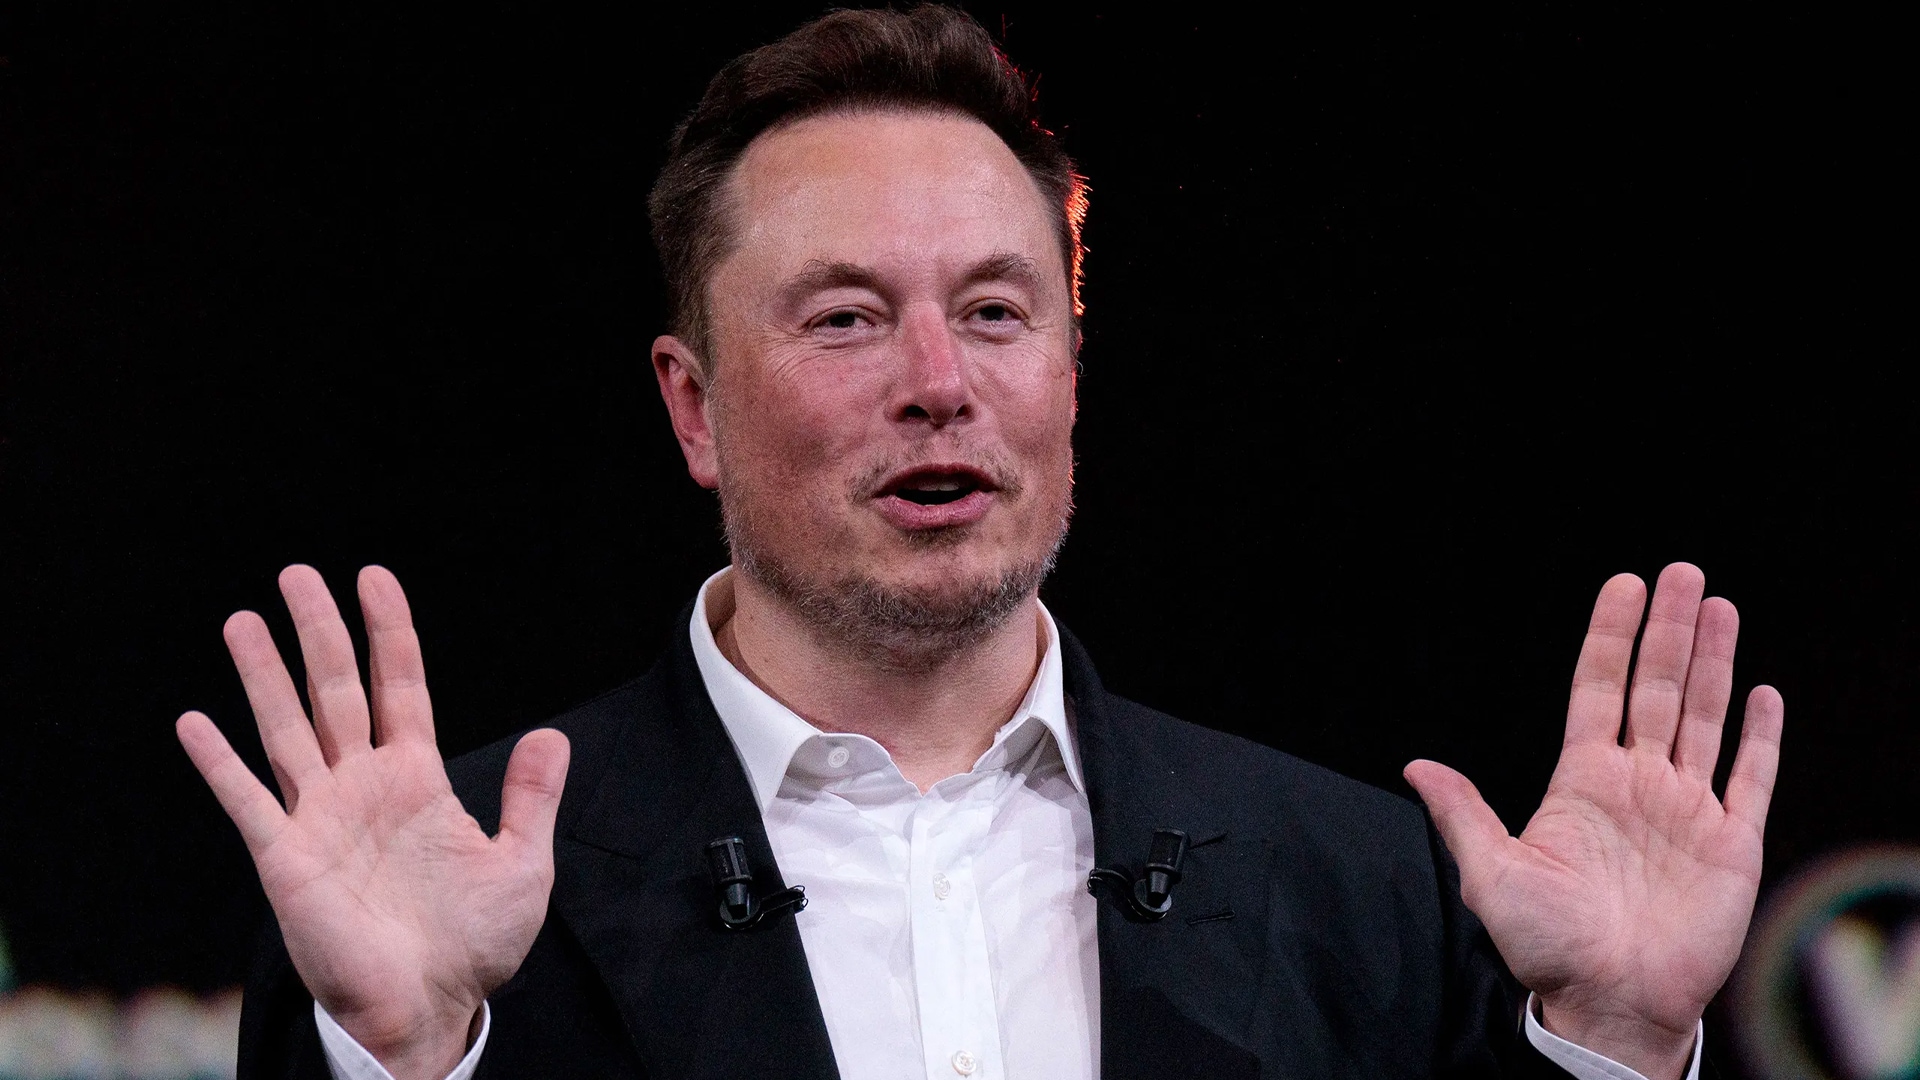 Elon Musk gets trolled violently for bad-mouthing GTA VI, saying violent video games are bad